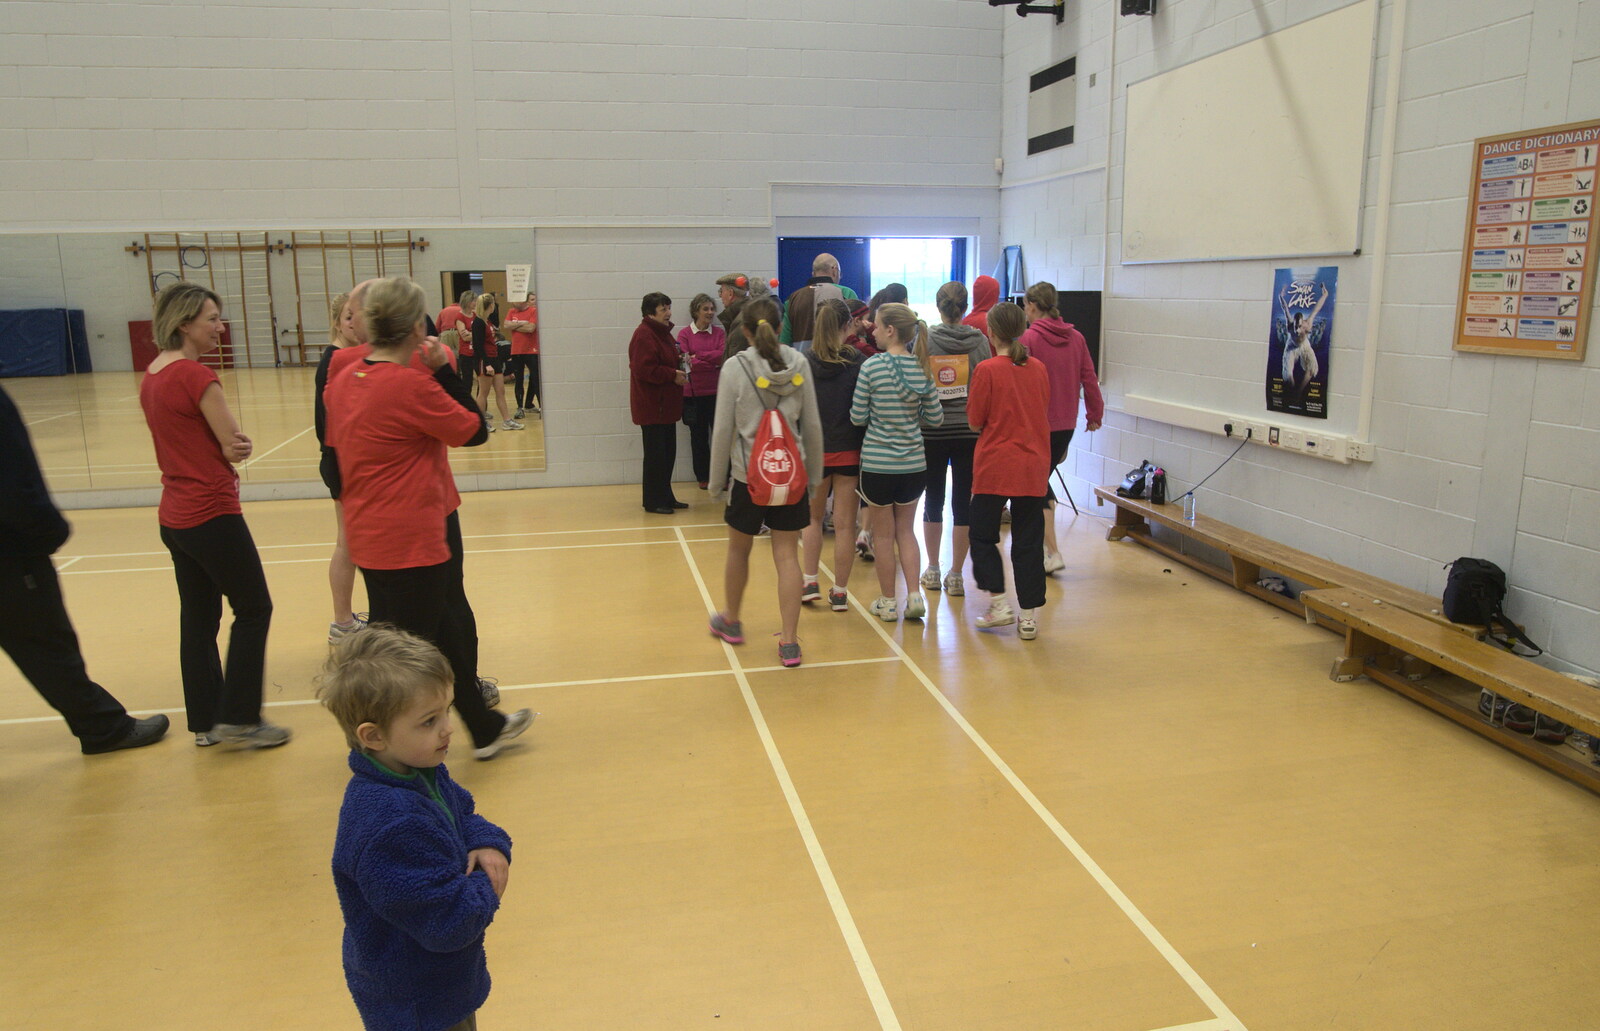 The runners leave for the start of the race from Isobel's Fun Run, Hartismere High, Eye, Suffolk - 23rd March 2014